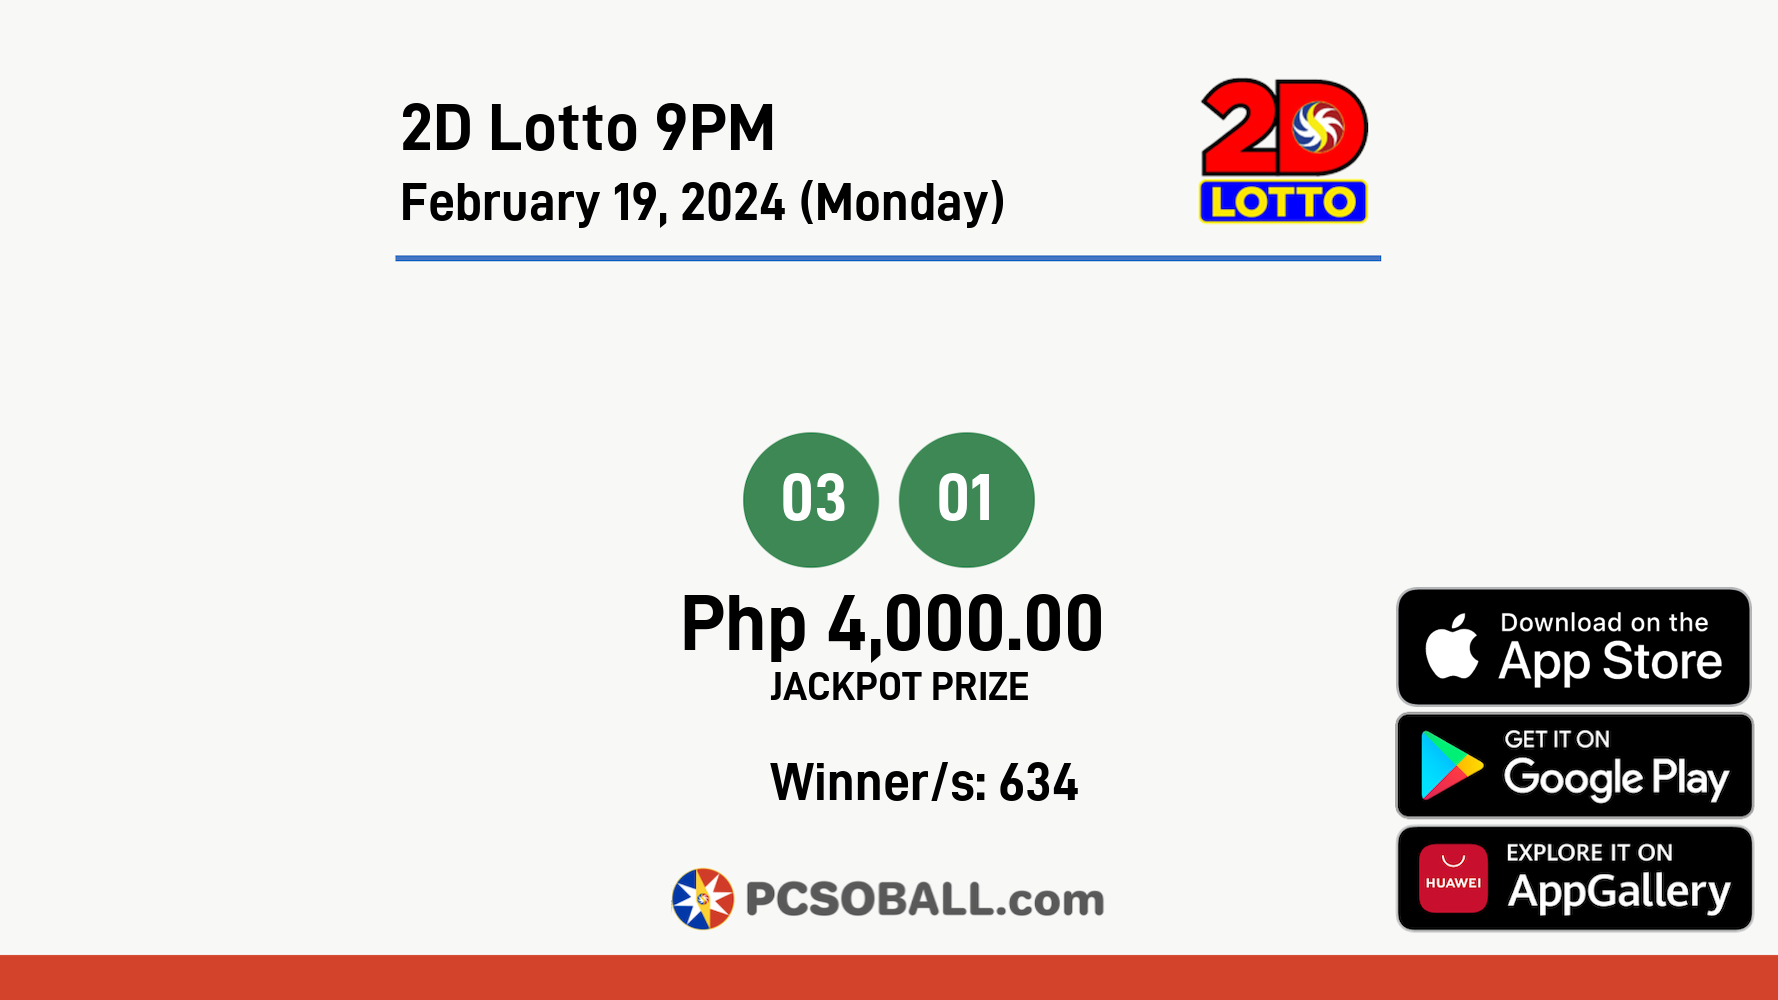 2D Lotto 9PM February 19, 2024 (Monday) Result